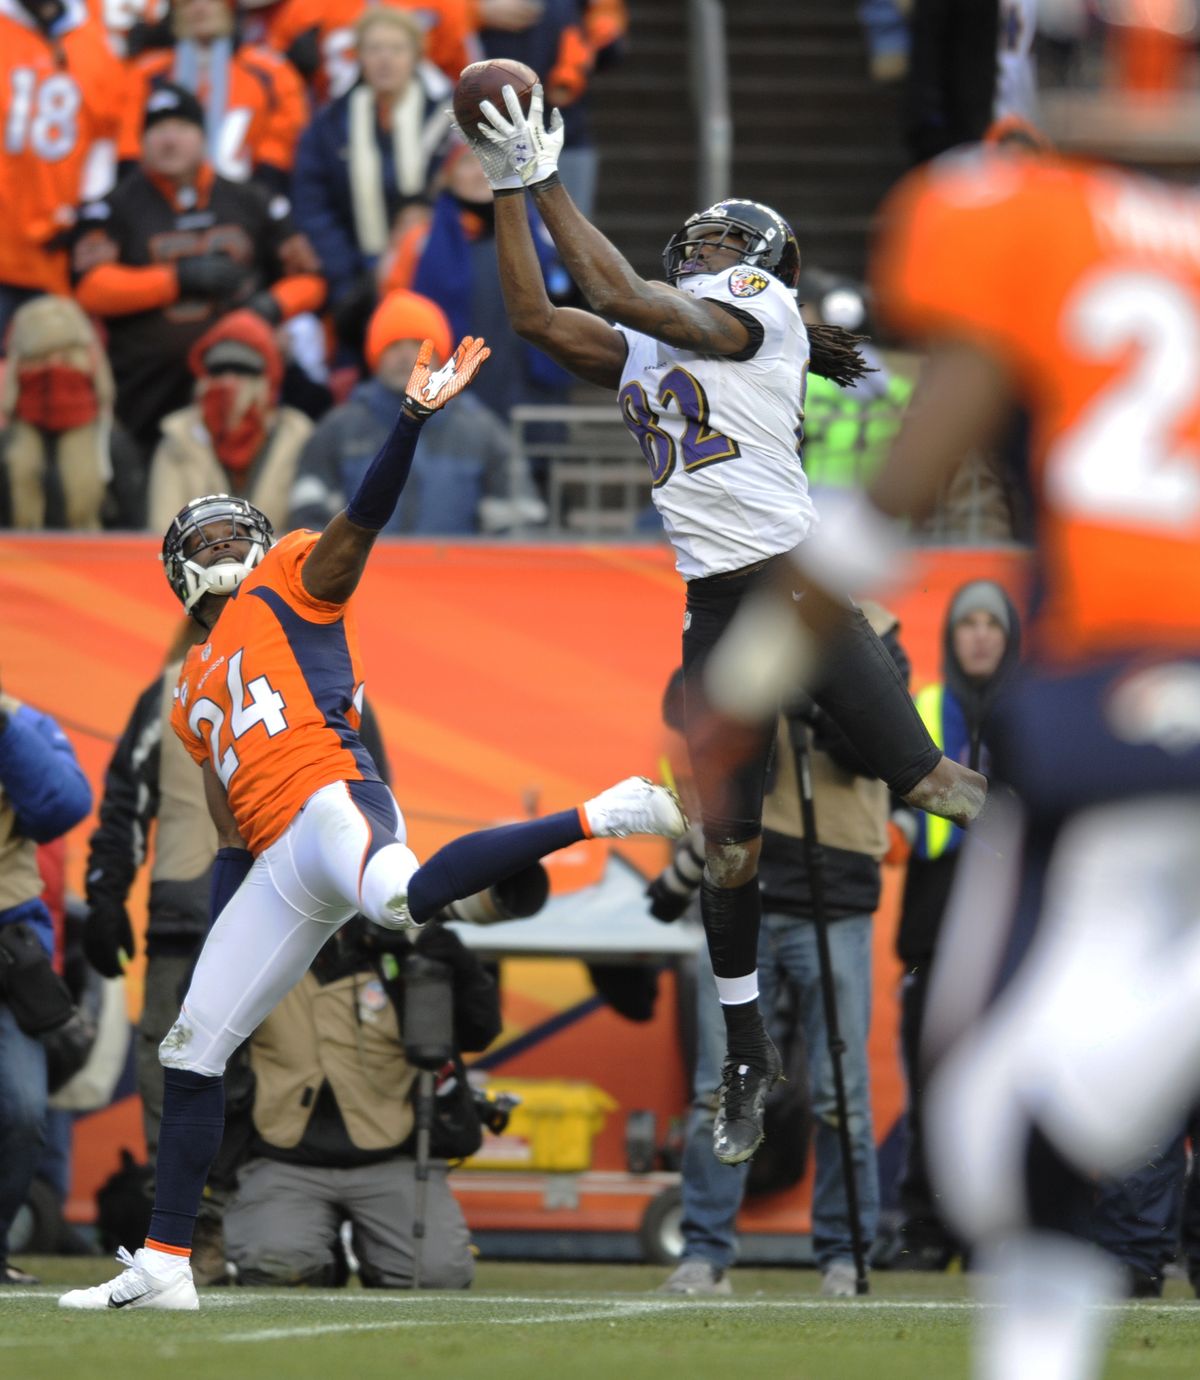 Torrey Smith makes one of his two TD catches against Champ Bailey in a playoff win over the Broncos. (Associated Press)